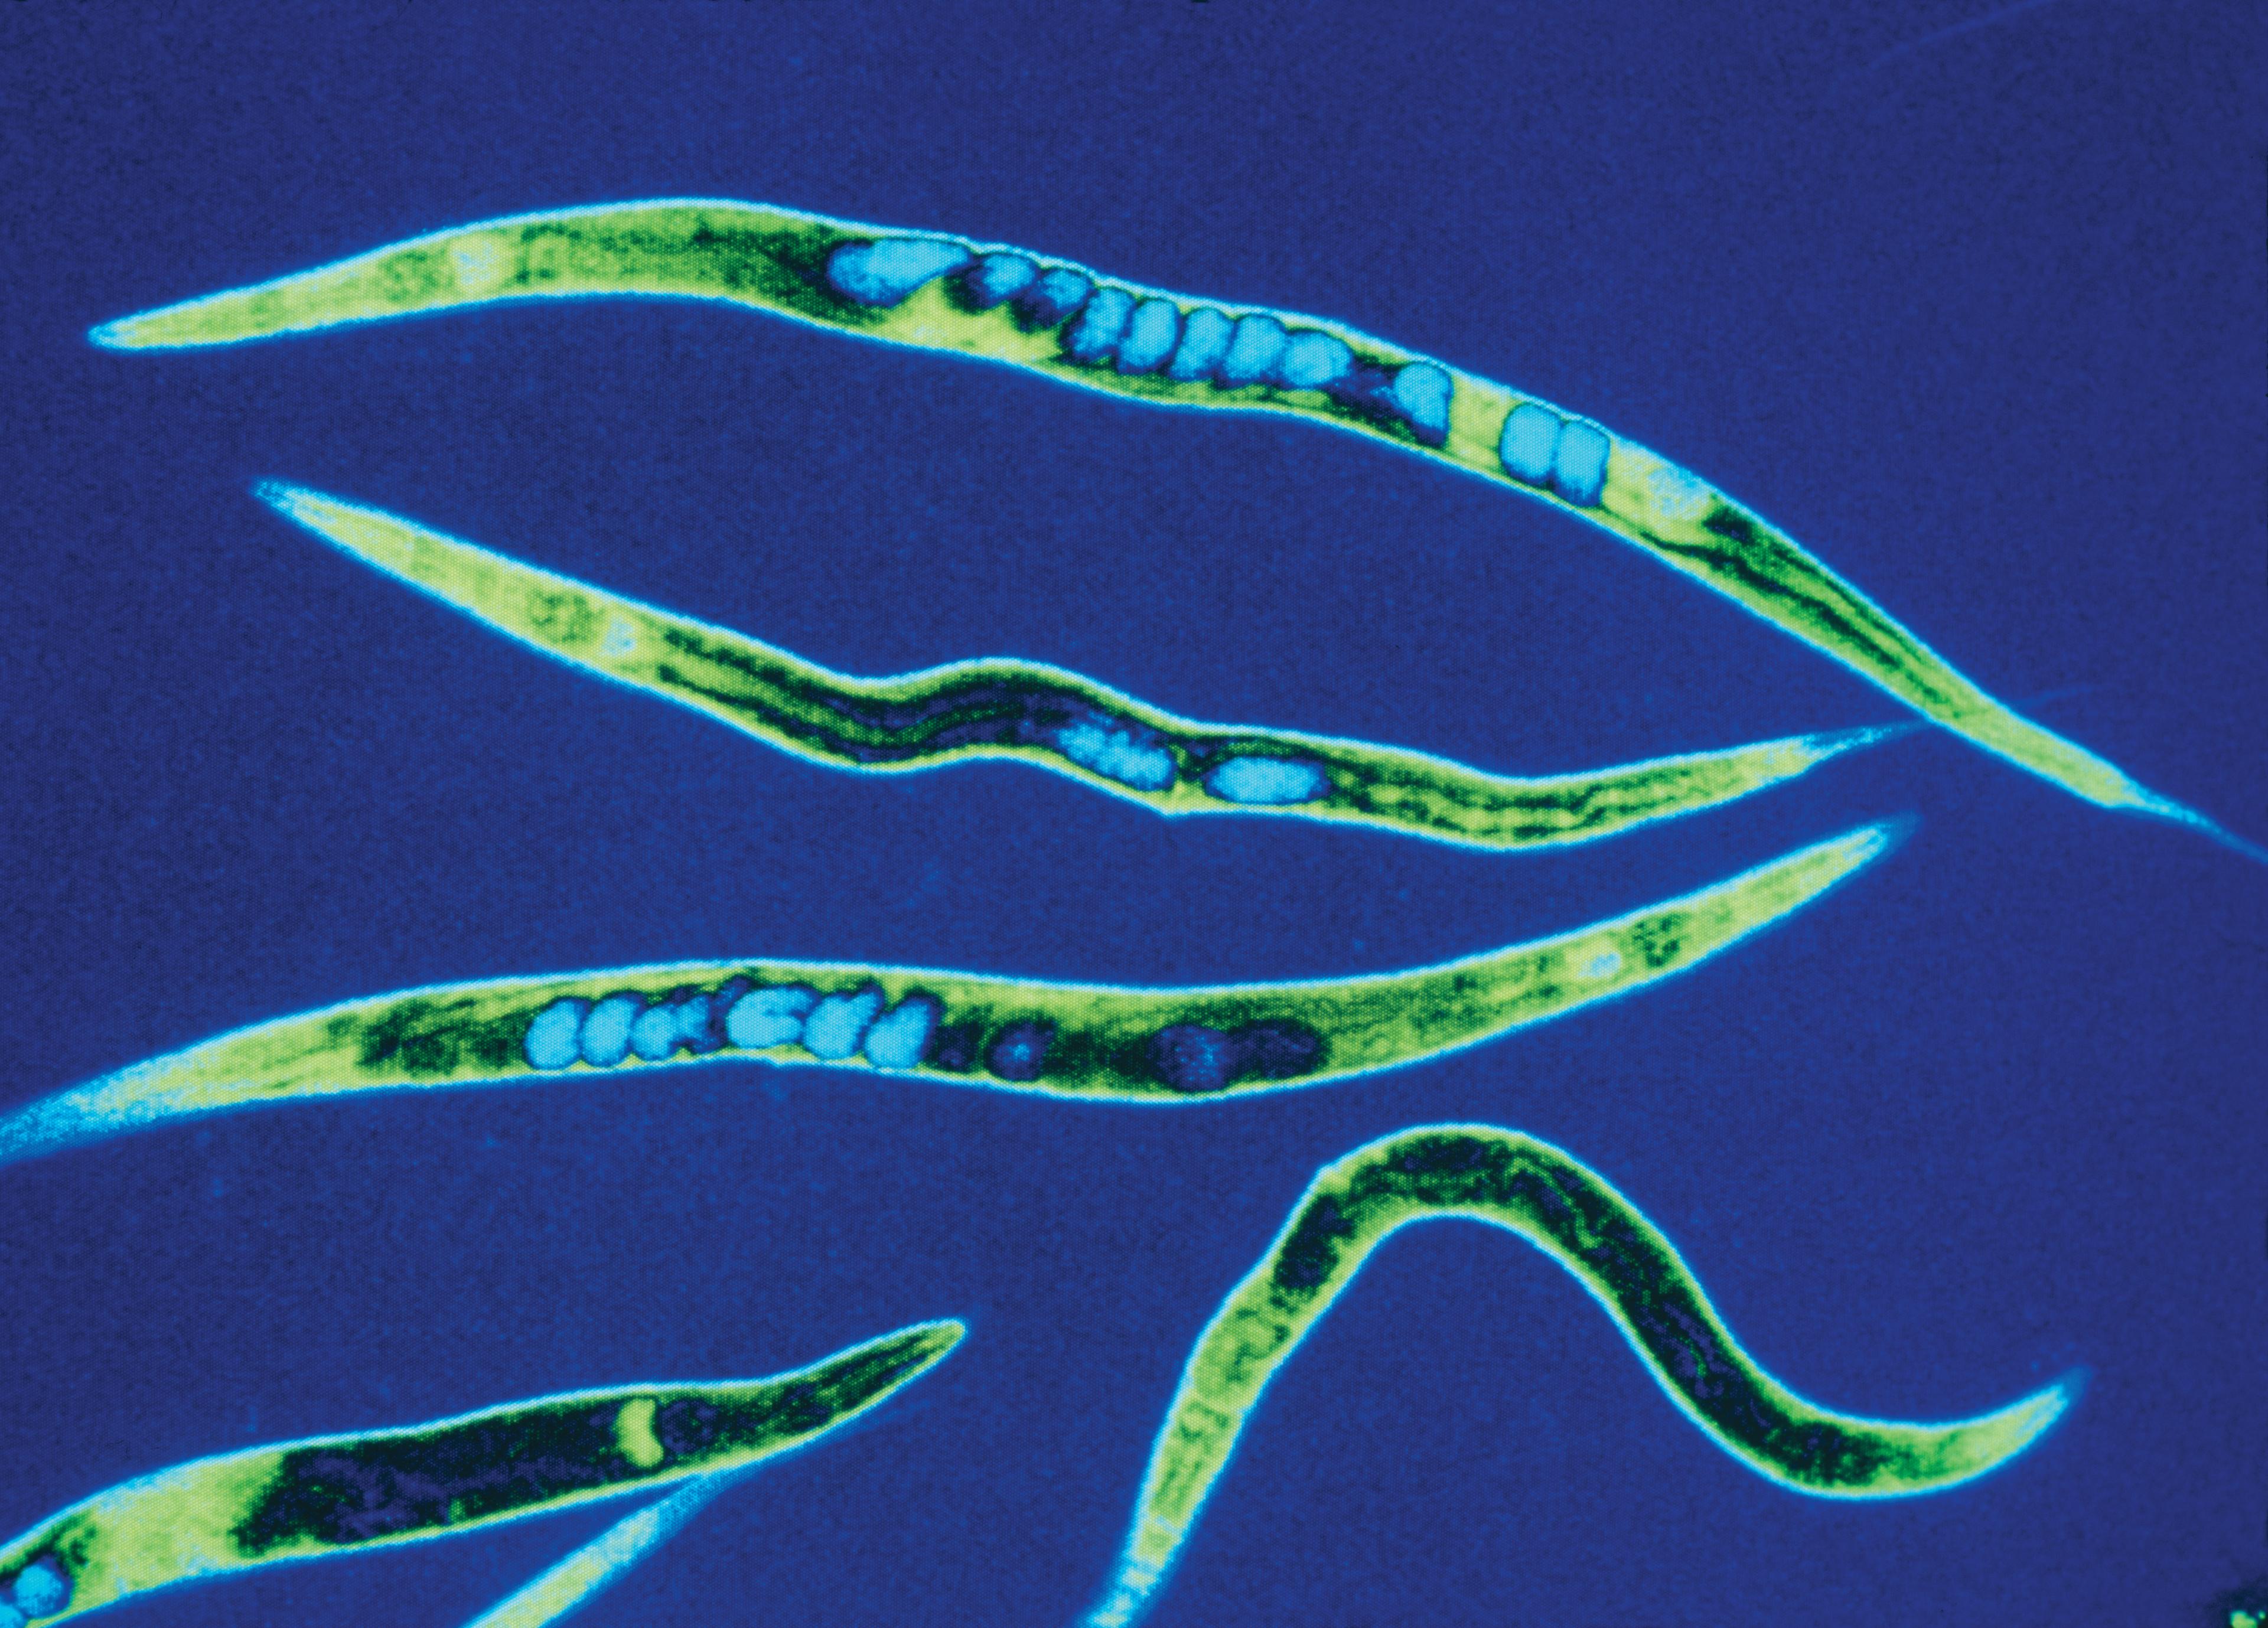 False-colour scanning optical micrograph of Caenorhabditis elegans (C. elegans). Cornelia Bargmann has for more than two decades used these millimetre-sized transparent worms as a model organism for understanding how genes and the environment influence animal behaviour.